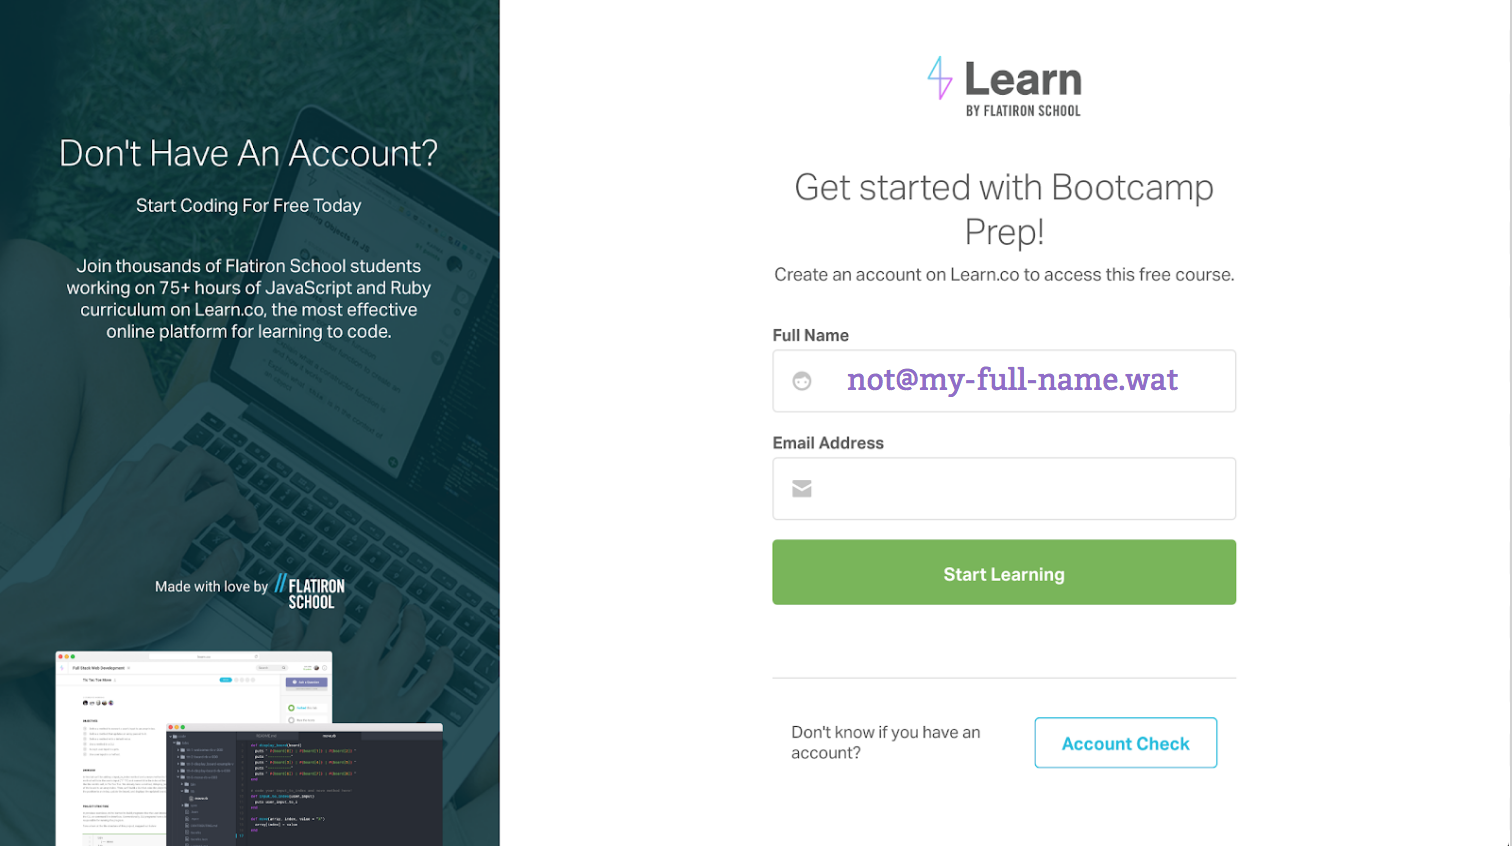 Learn.co Bootcamp Prep course sign up form